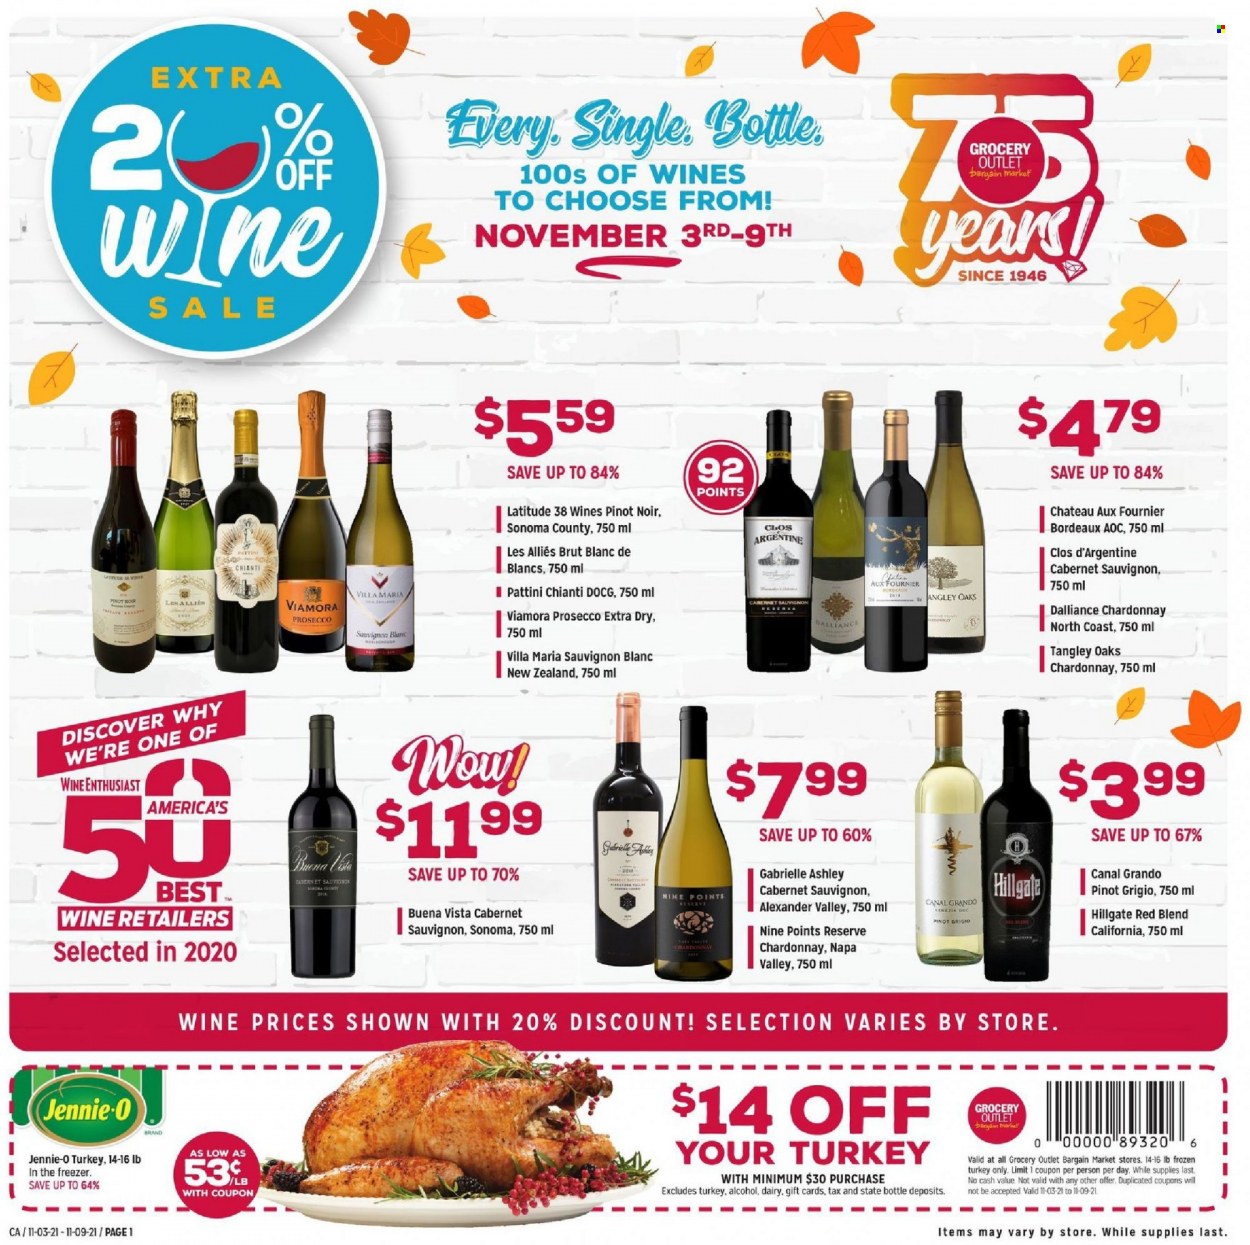 thumbnail - Grocery Outlet Flyer - 11/03/2021 - 11/09/2021 - Sales products - Cabernet Sauvignon, red wine, white wine, prosecco, Chardonnay, wine, Pinot Noir, Pinot Grigio, Sauvignon Blanc, whole turkey, Brut. Page 1.